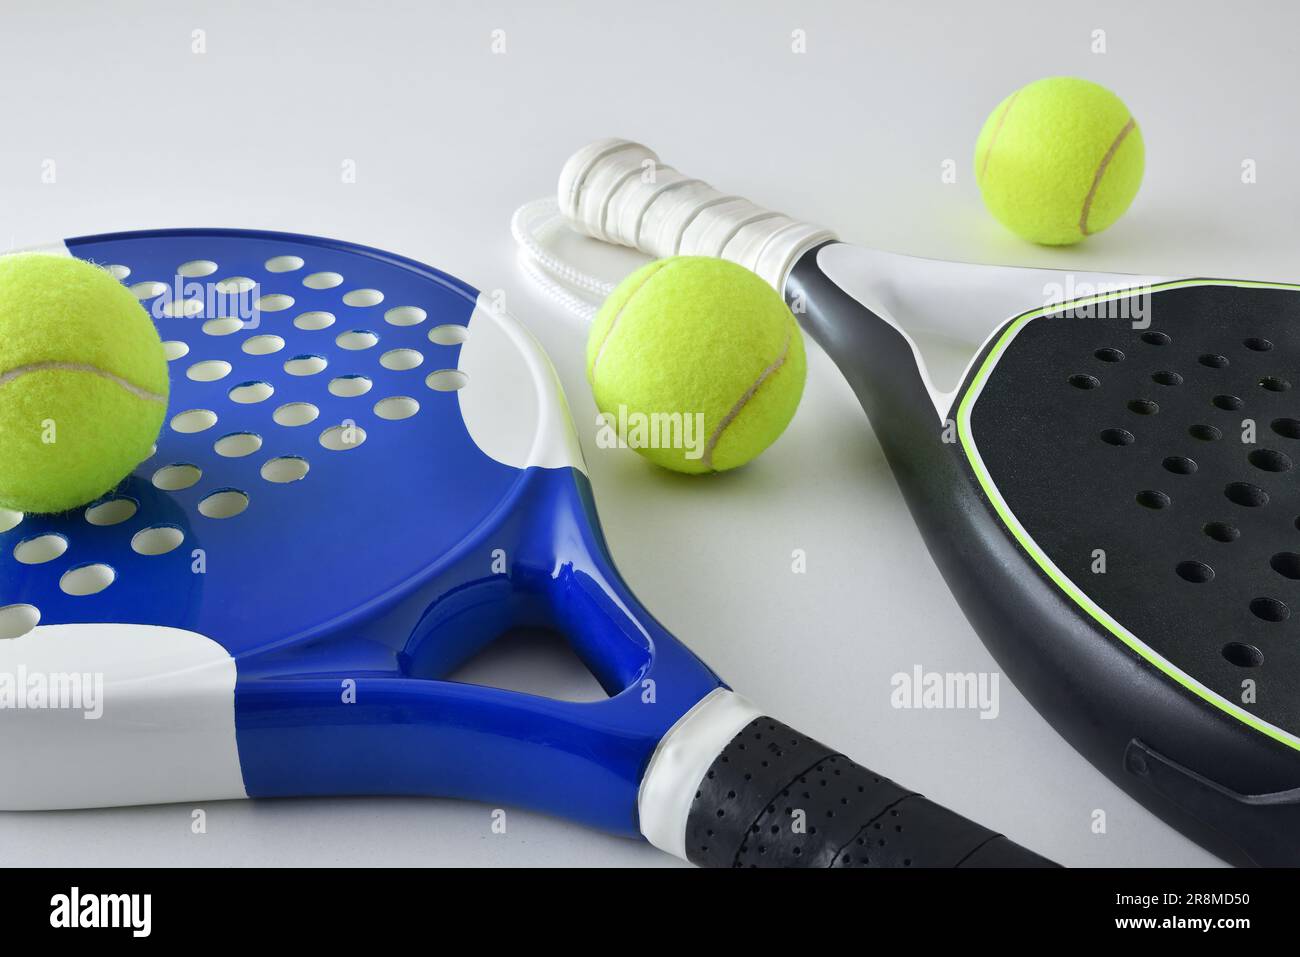 Background with two blue and black paddle rackets on a white table with balls. Elevated view. Stock Photo